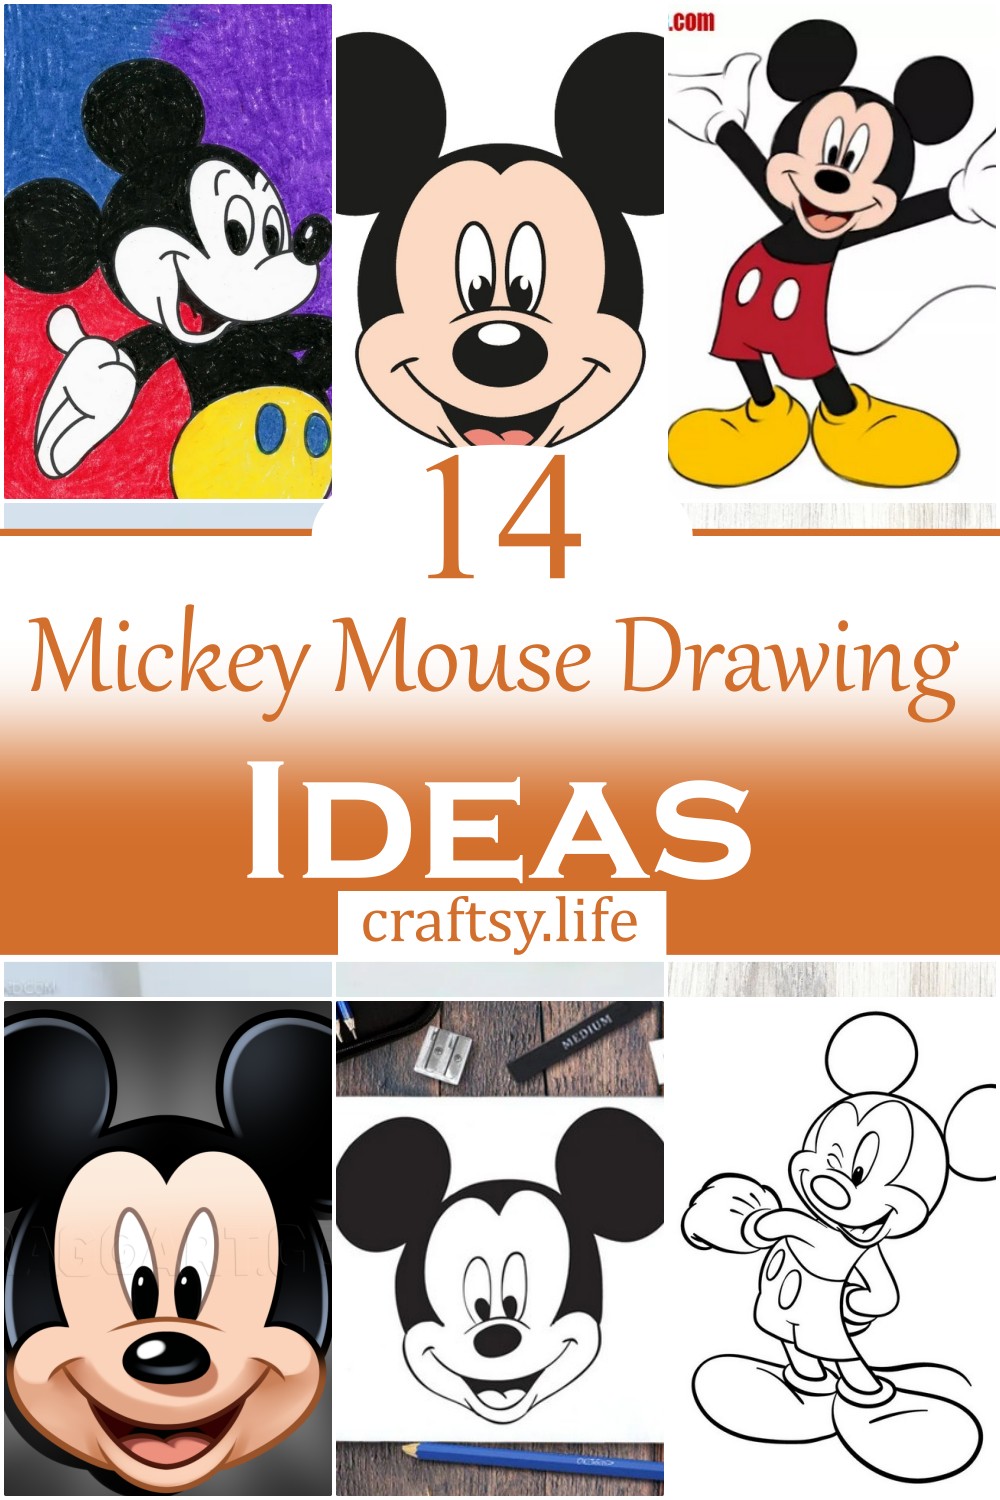 Mickey Mouse Drawing Ideas